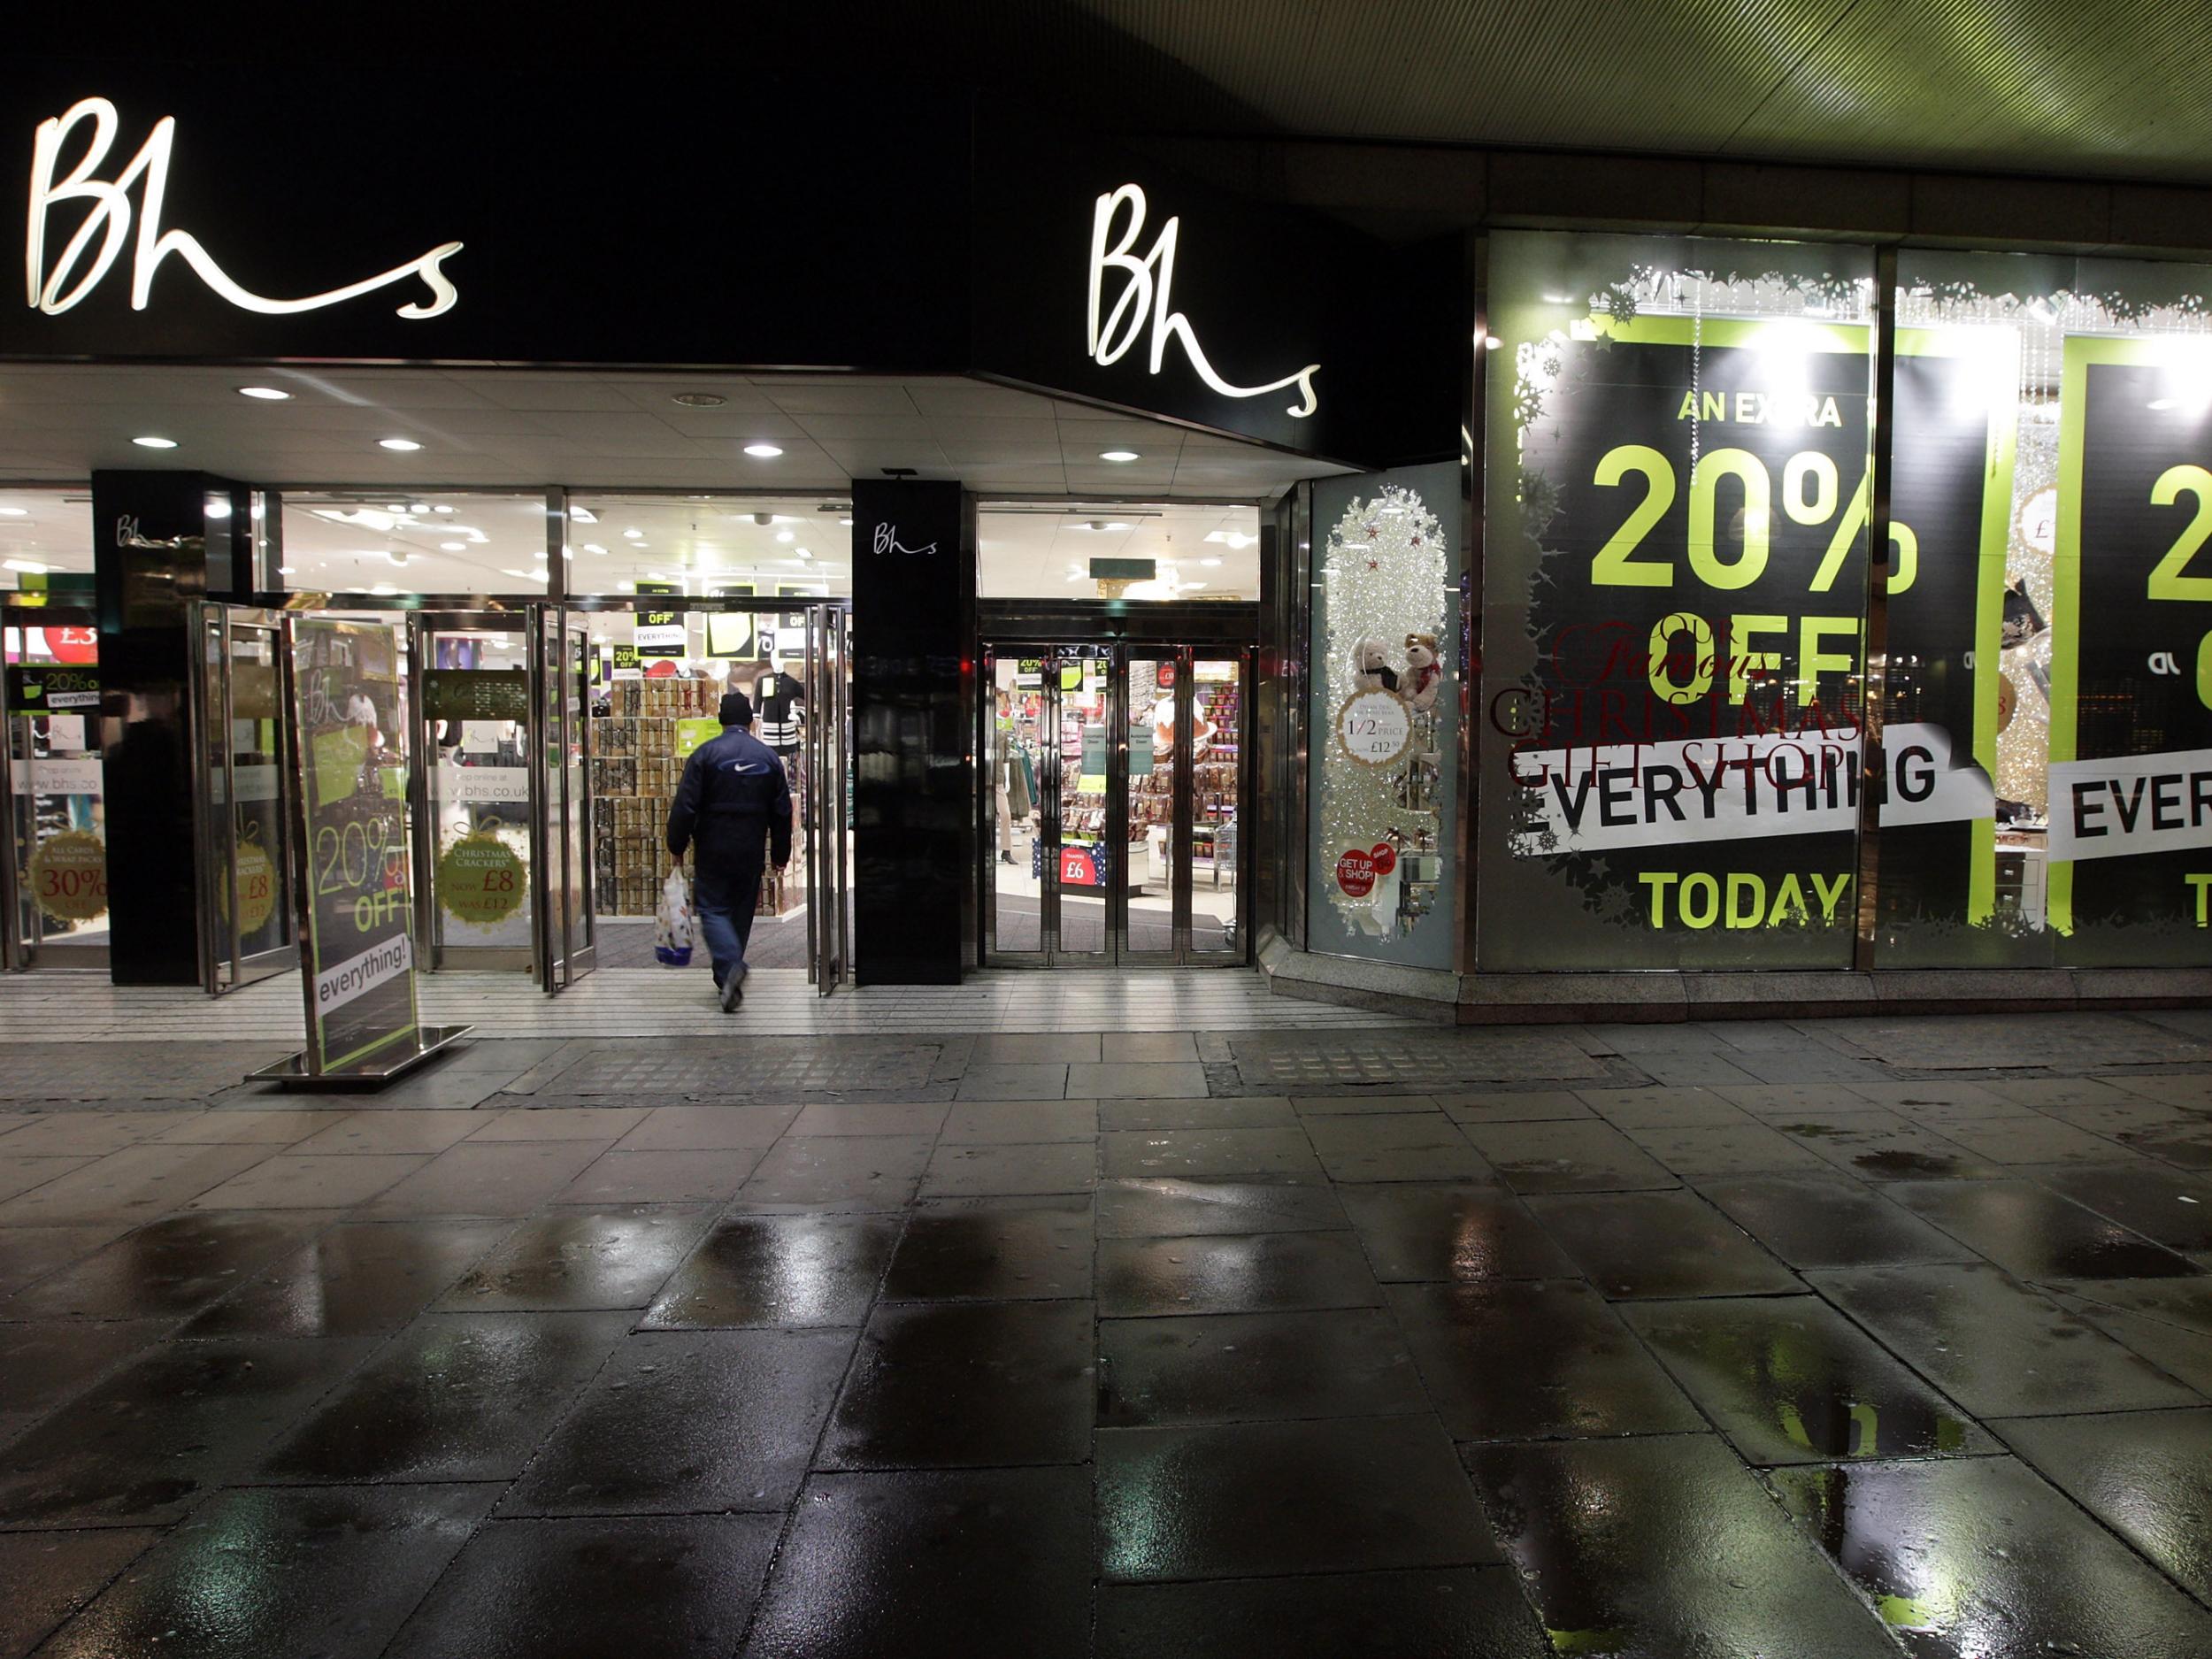 A shopper enters the BHS department store in Oxford Street shortly after 7am on November 28, 2008